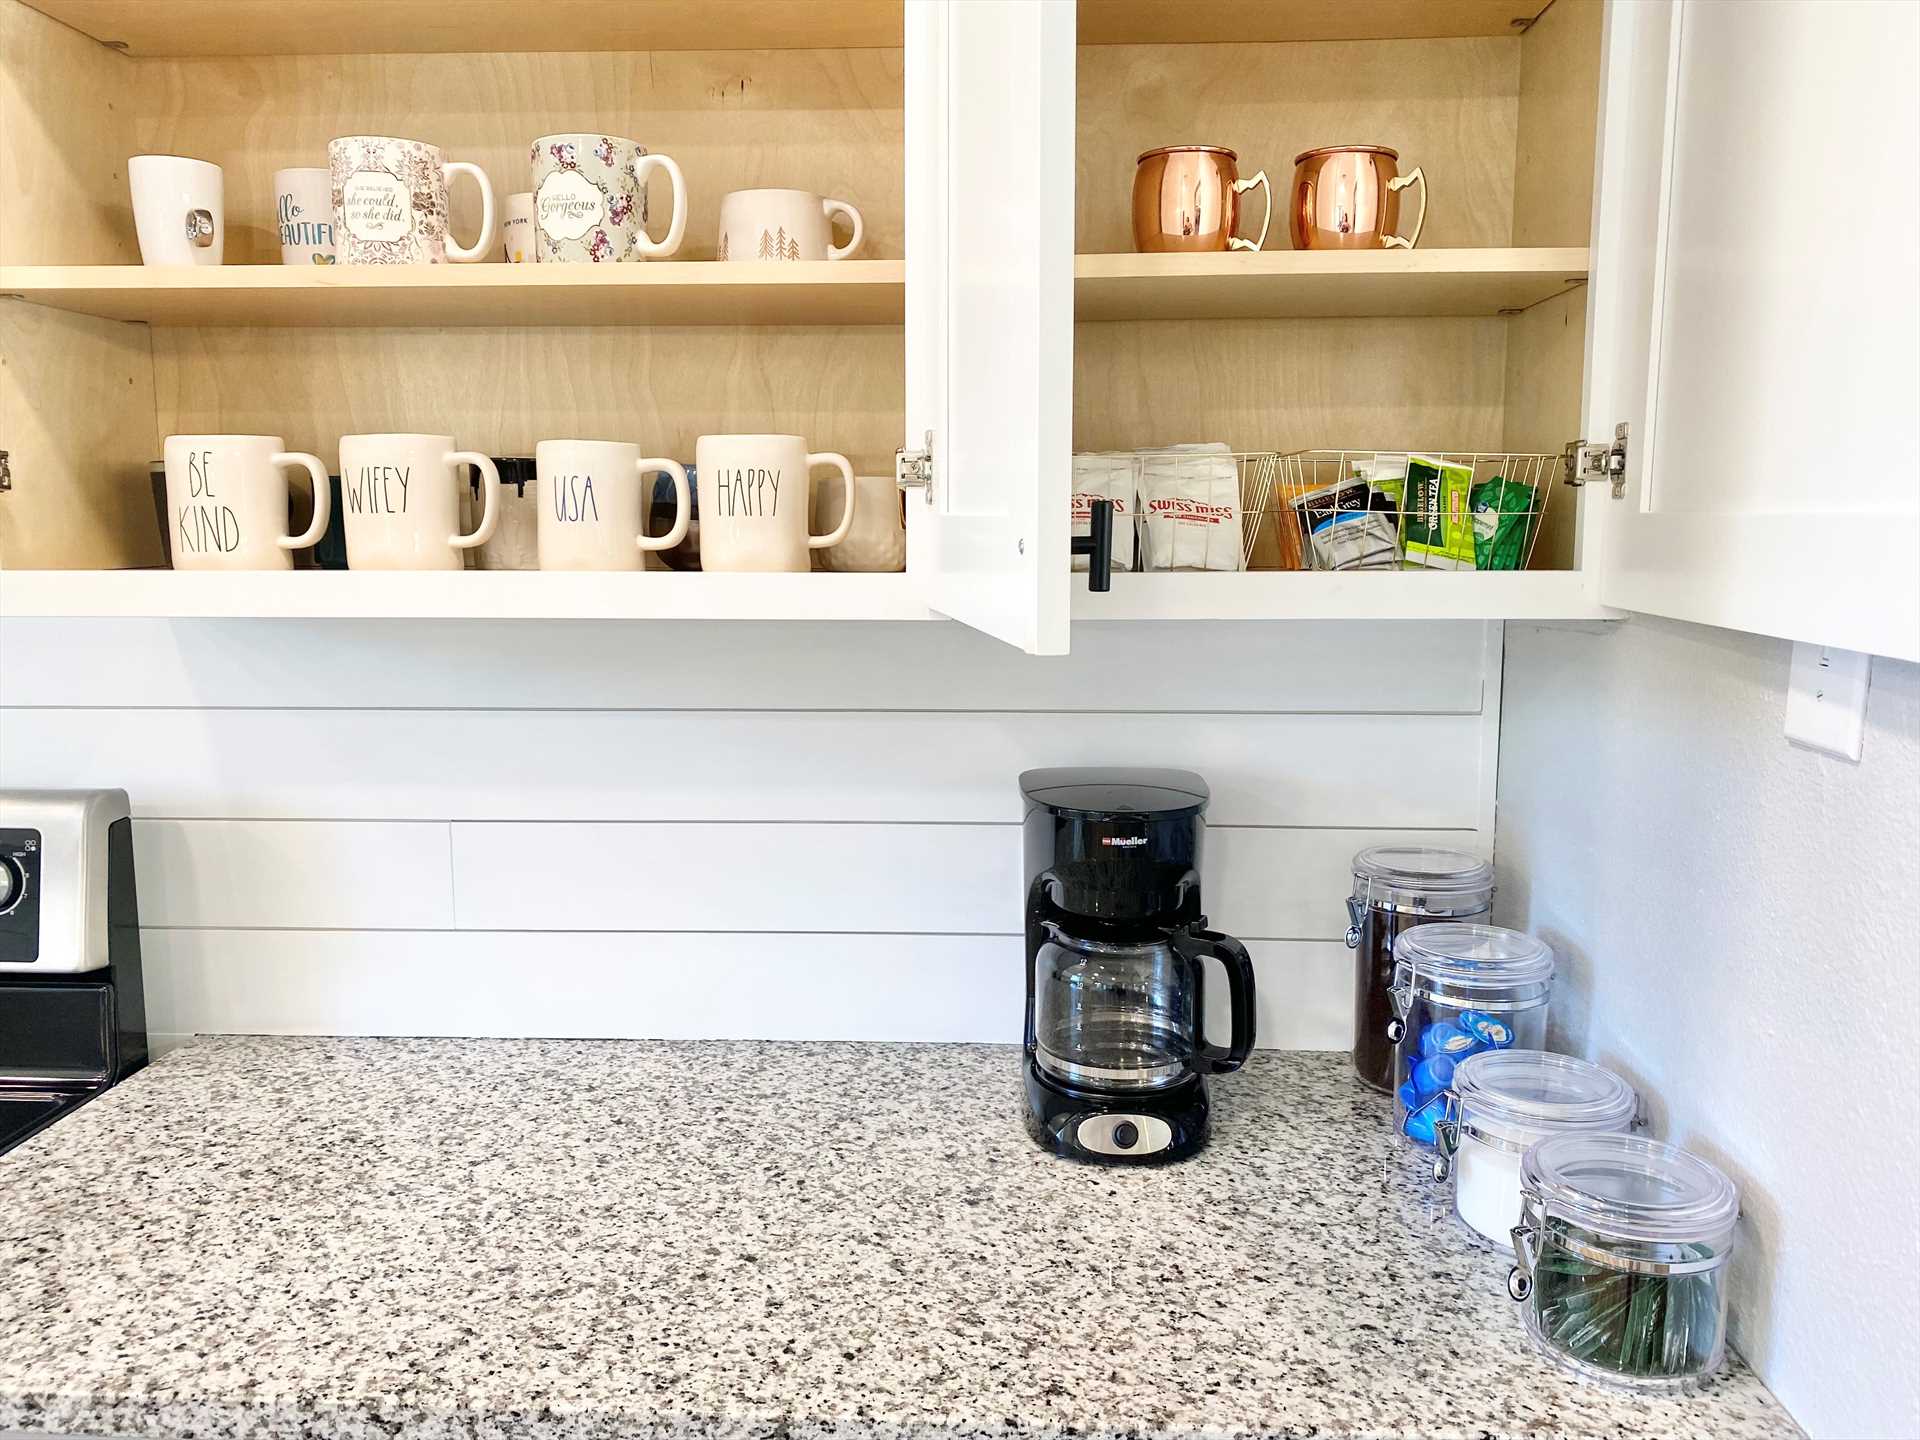                                                 Coffee, tea, hot chocolate, and cups are provided for those all-important morning pick-me-ups. There's also plenty of cookware, utensils, and serving ware here.